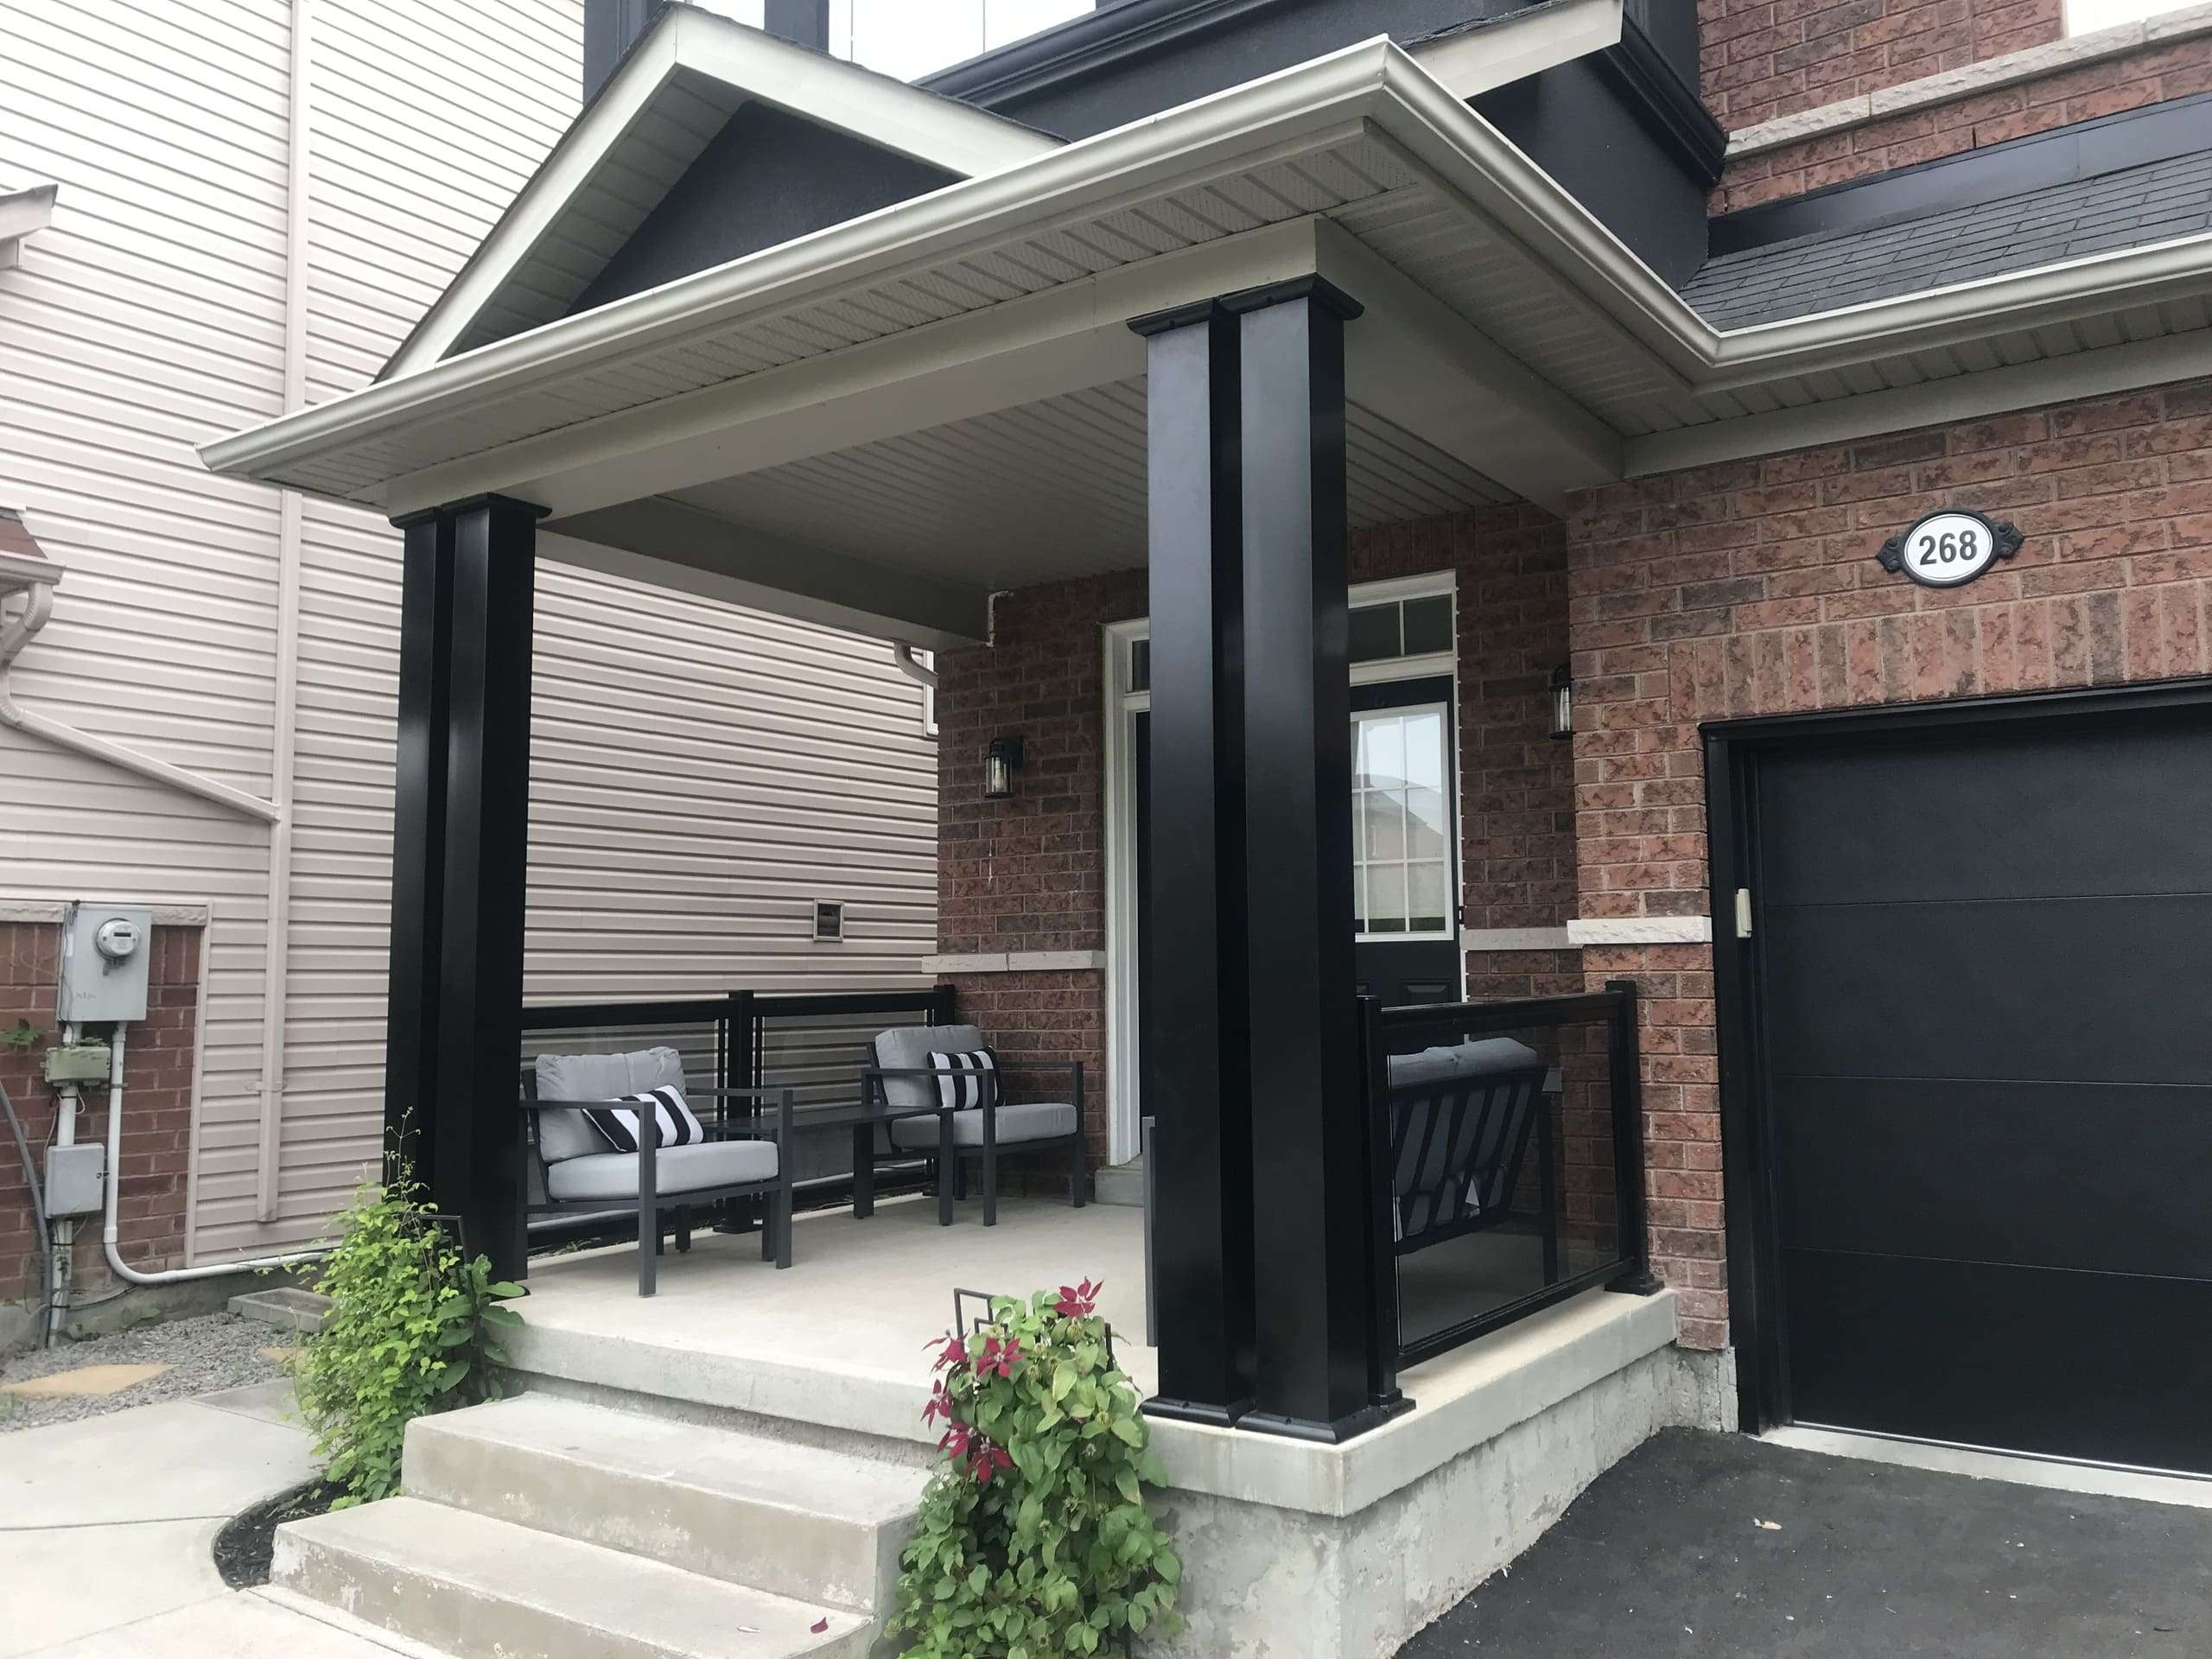 BLACK Twin Aluminum Columns & Porch Railings with Tinted Glass Installation (Milton, ON)